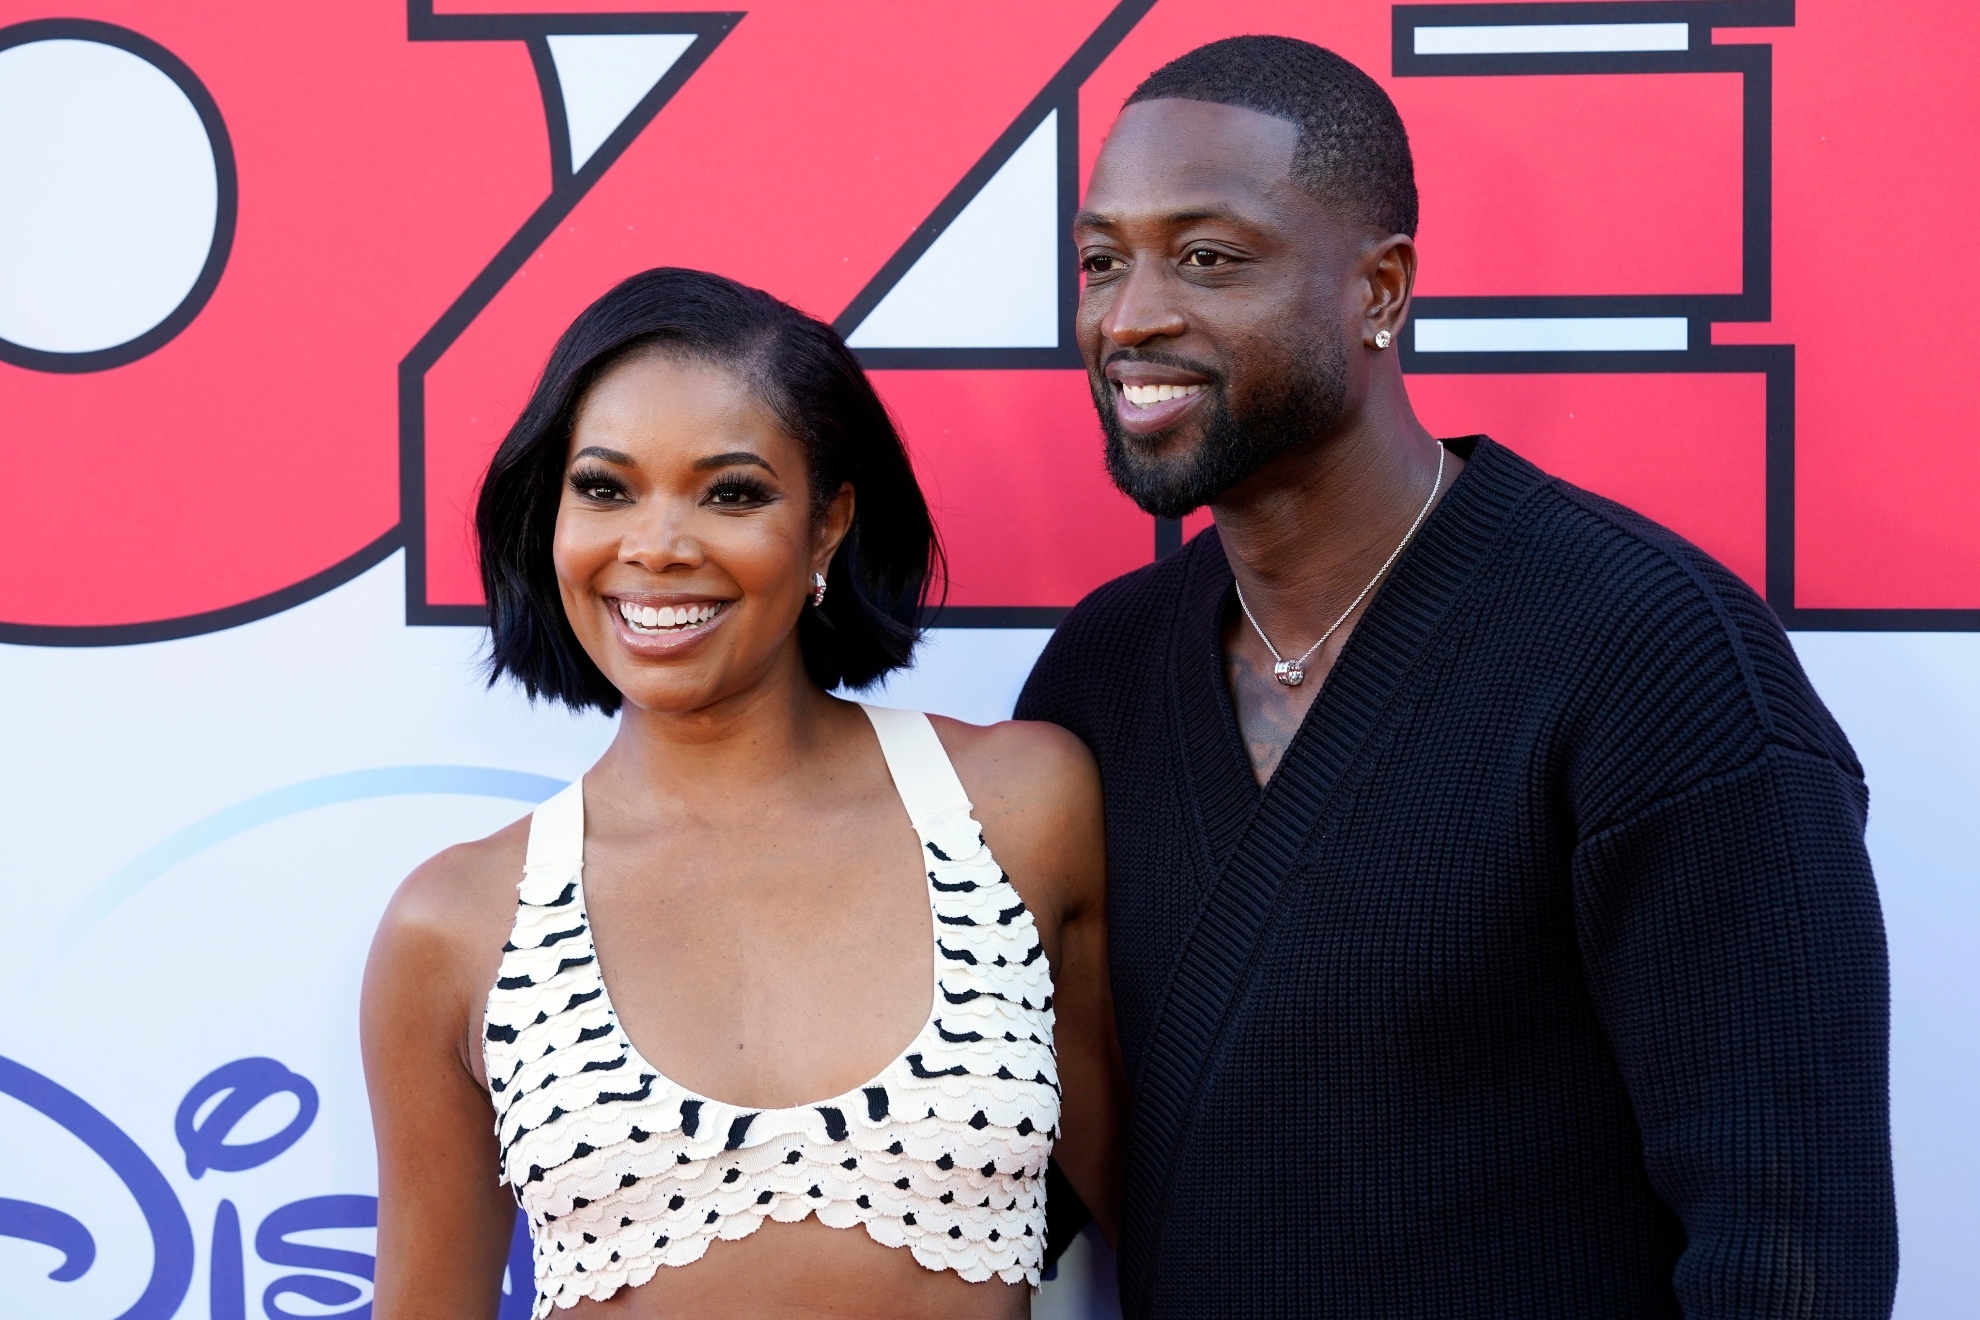 Gabrielle Union and Dwyane Wade at a public event.